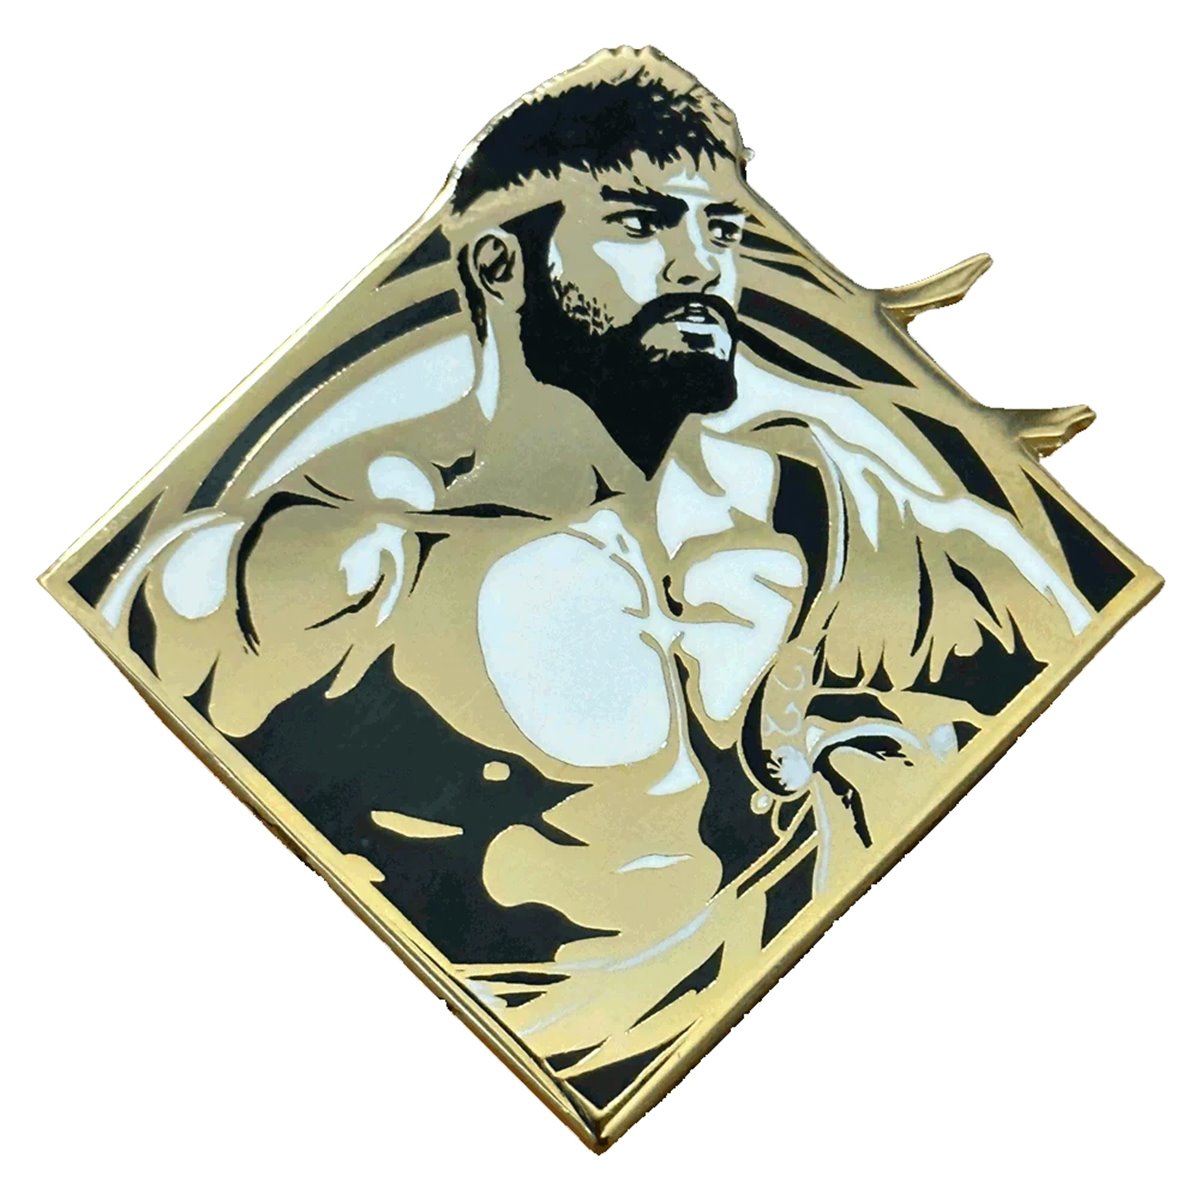 Street Fighter Ryu Augmented Reality Enamel Pin